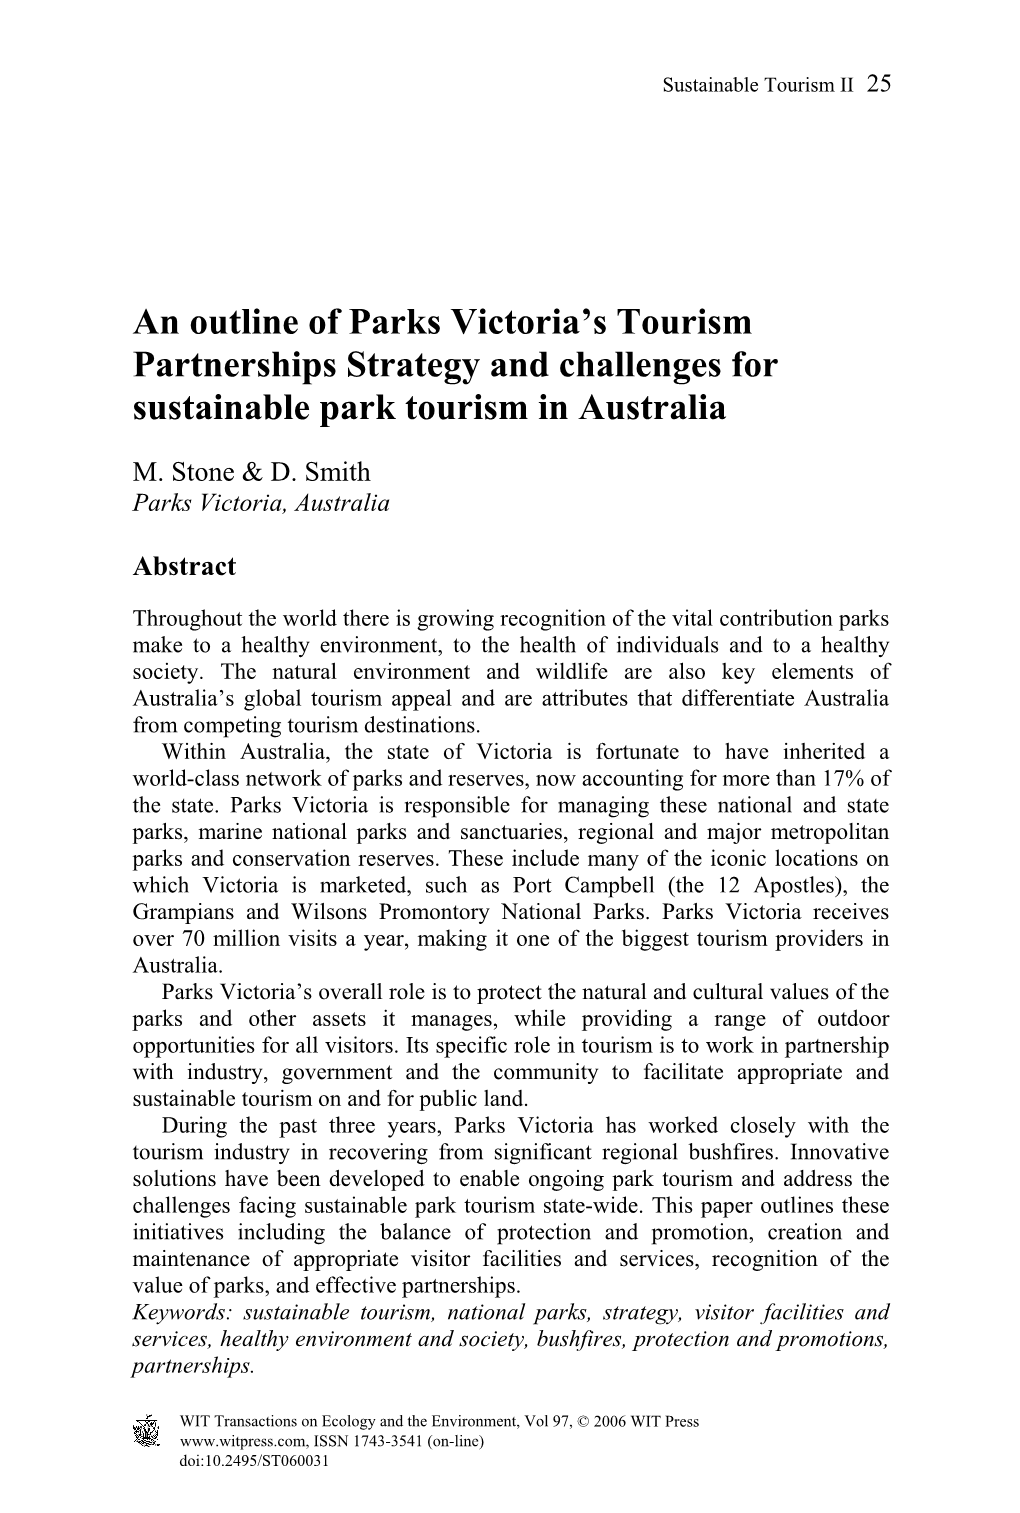 An Outline of Parks Victoria's Tourism Partnerships Strategy And